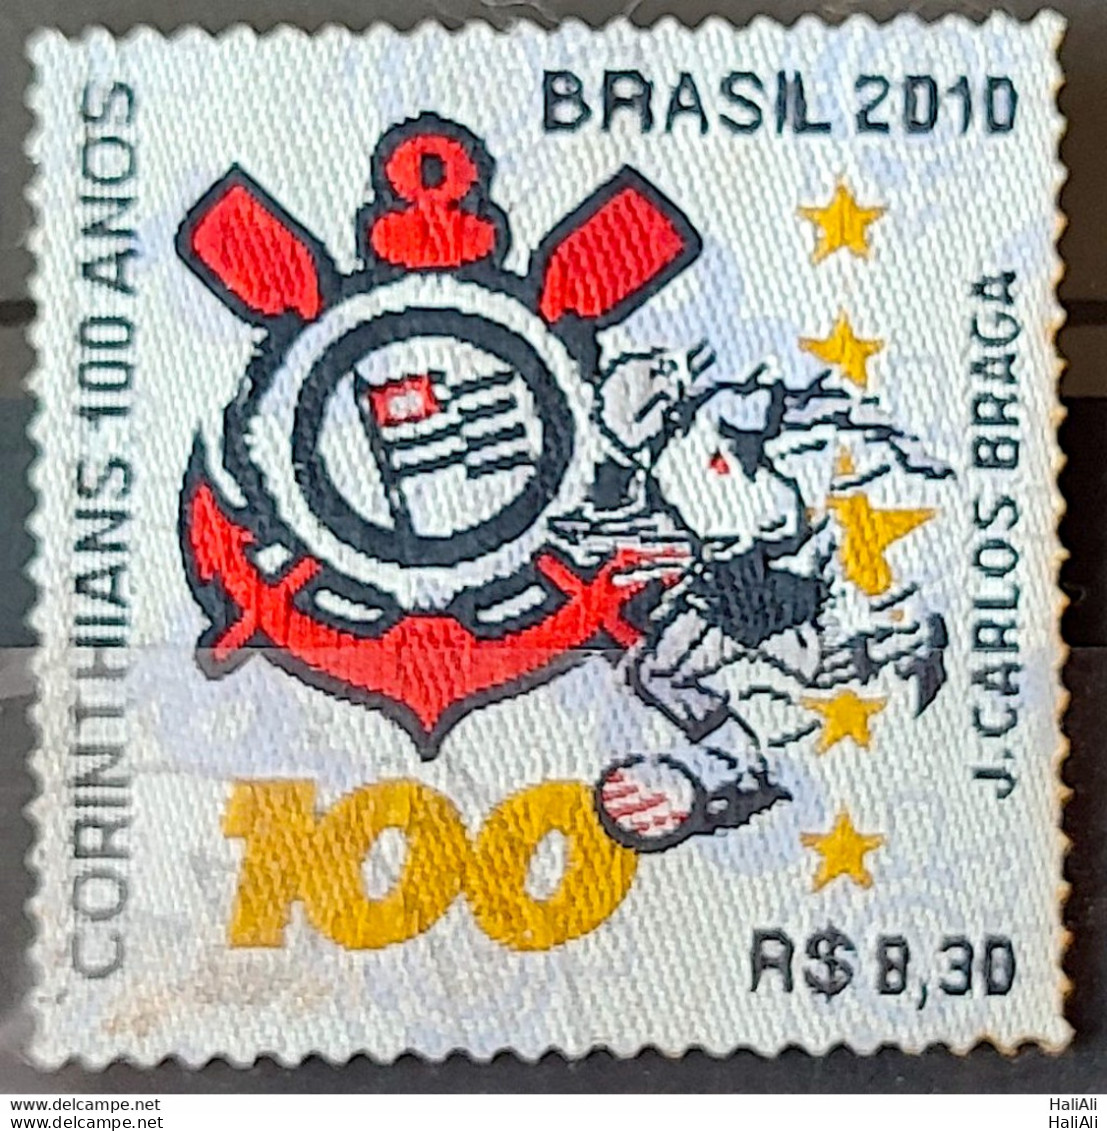 C 3028 Brazil Stamp 100 Years Of Corinthians Footaball Fabric Stamp 2010 Circulated 1 - Oblitérés